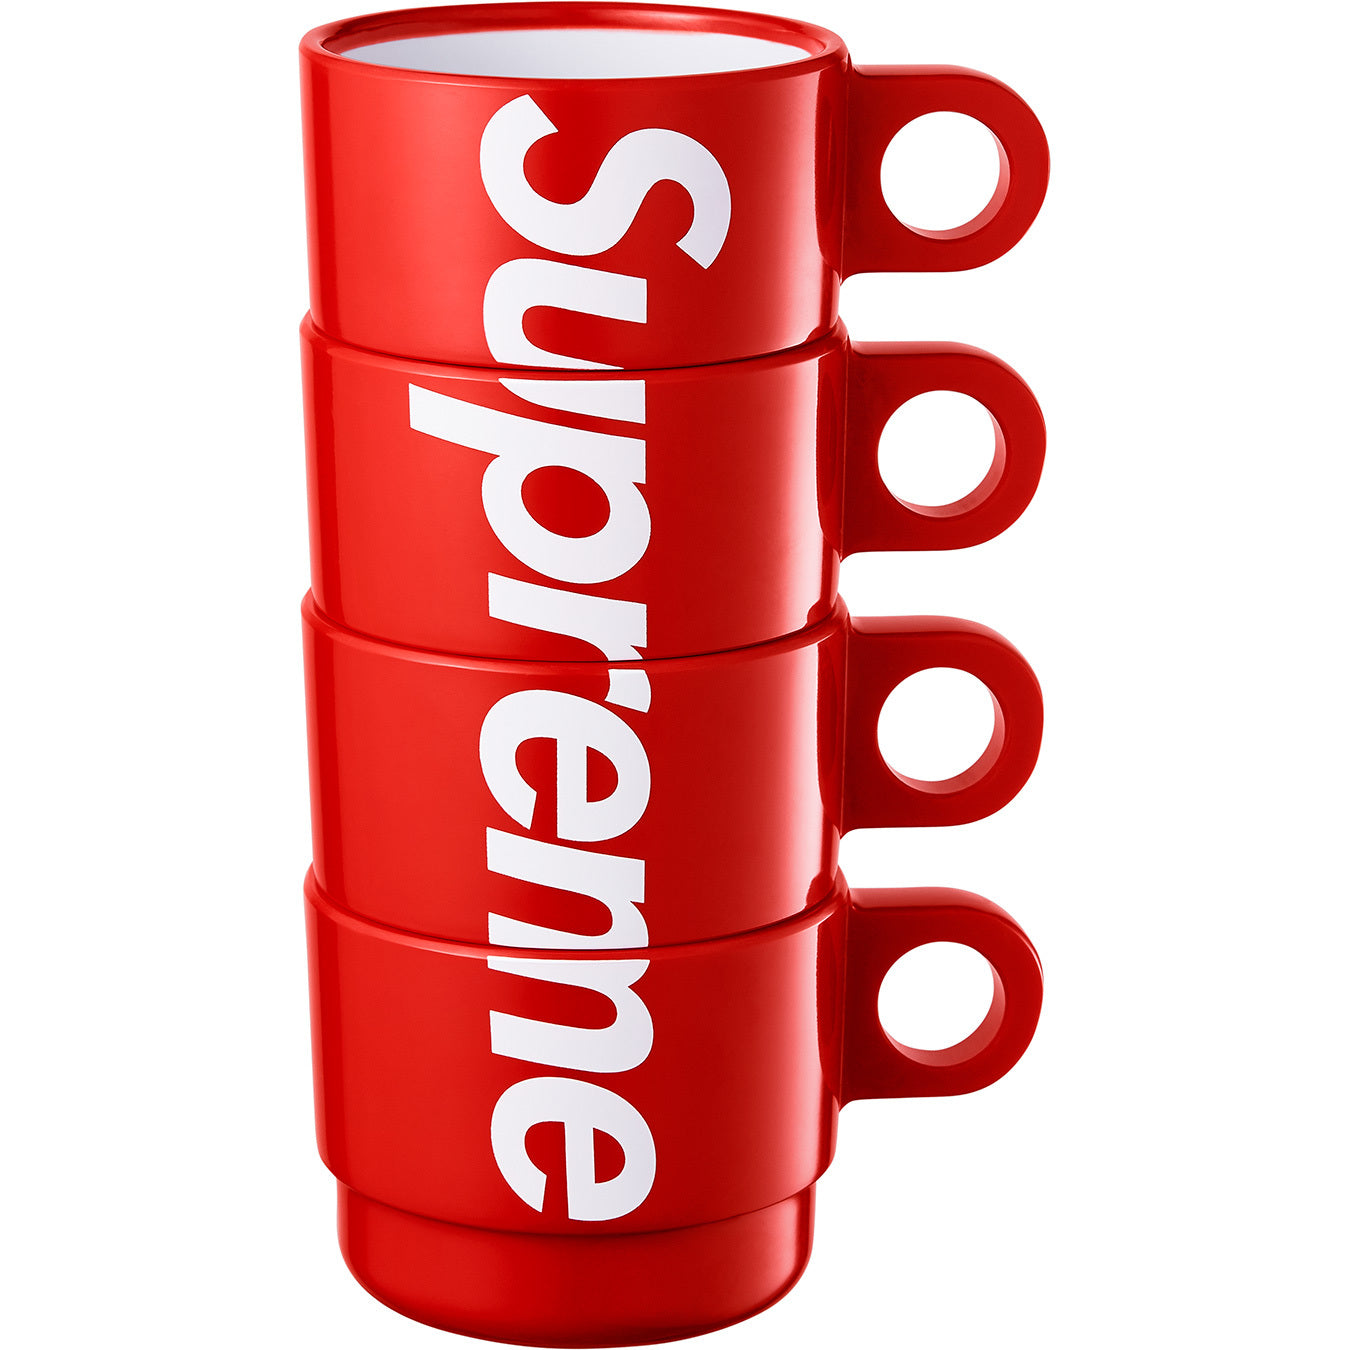 Supreme Stacking Cups (Set of 4) from Supreme